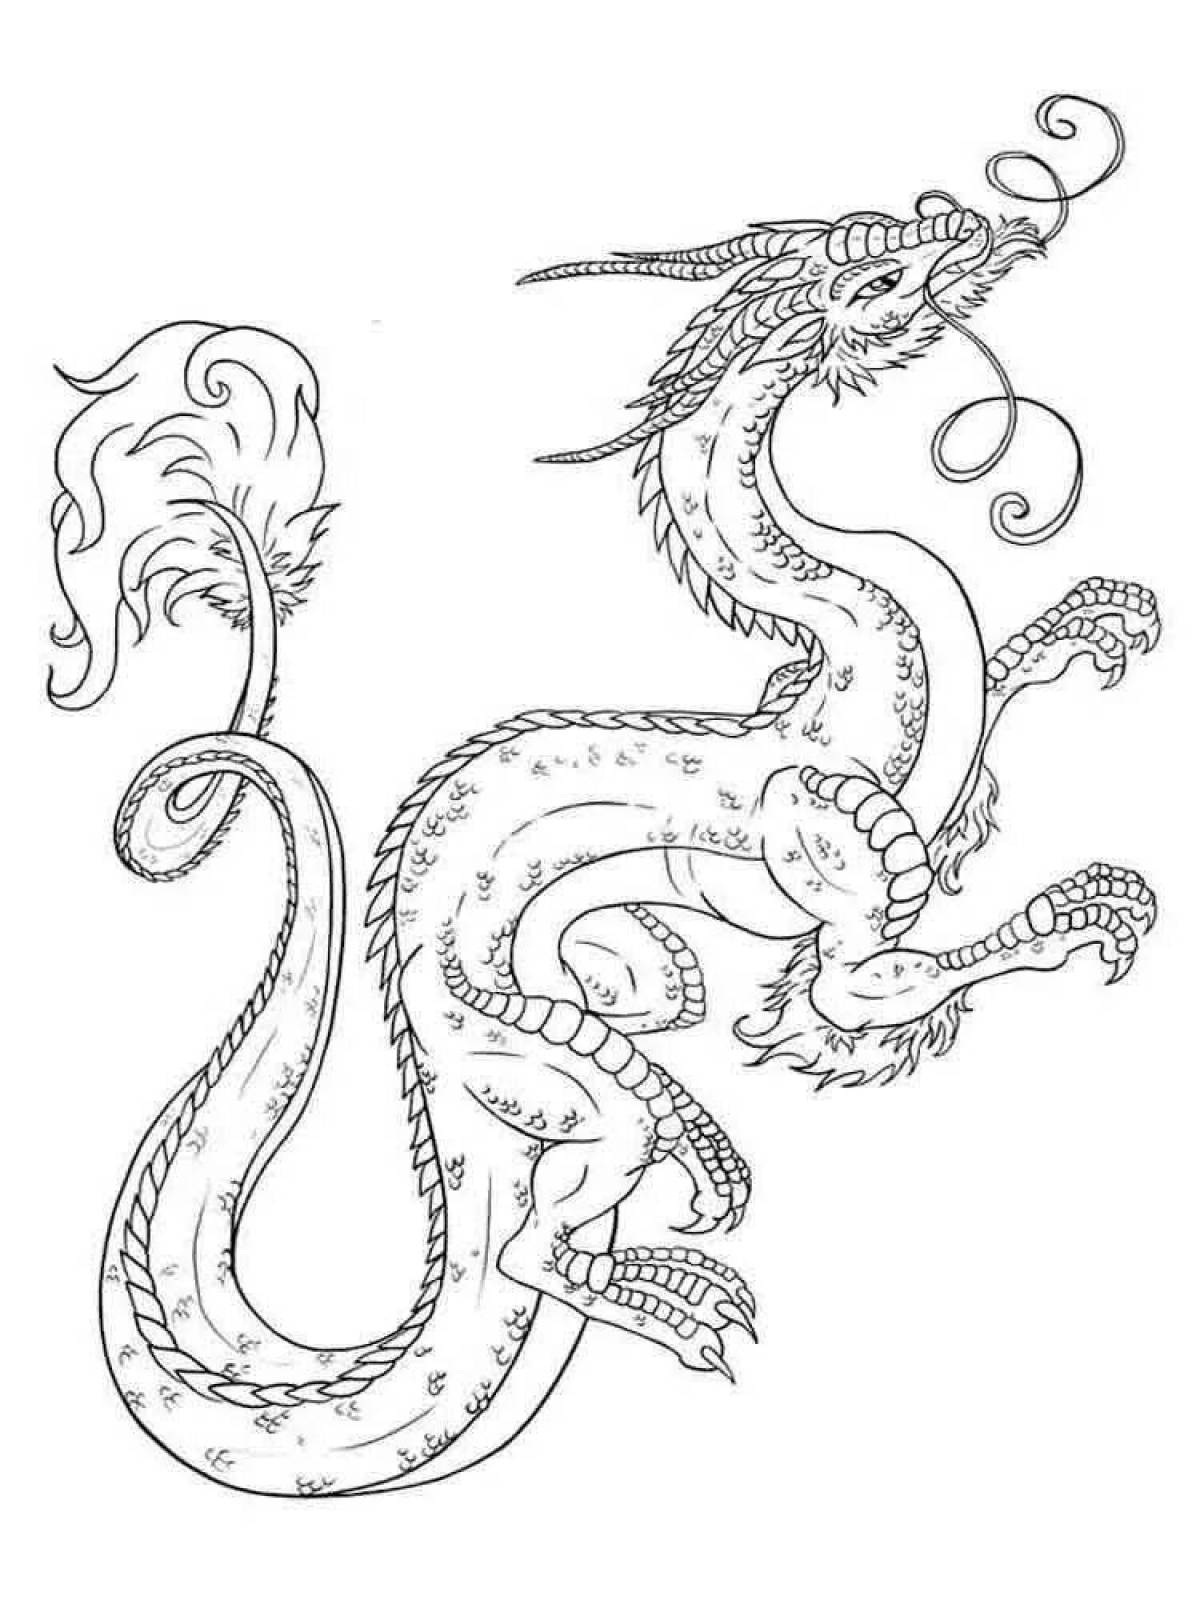 Grand Chinese dragon coloring page